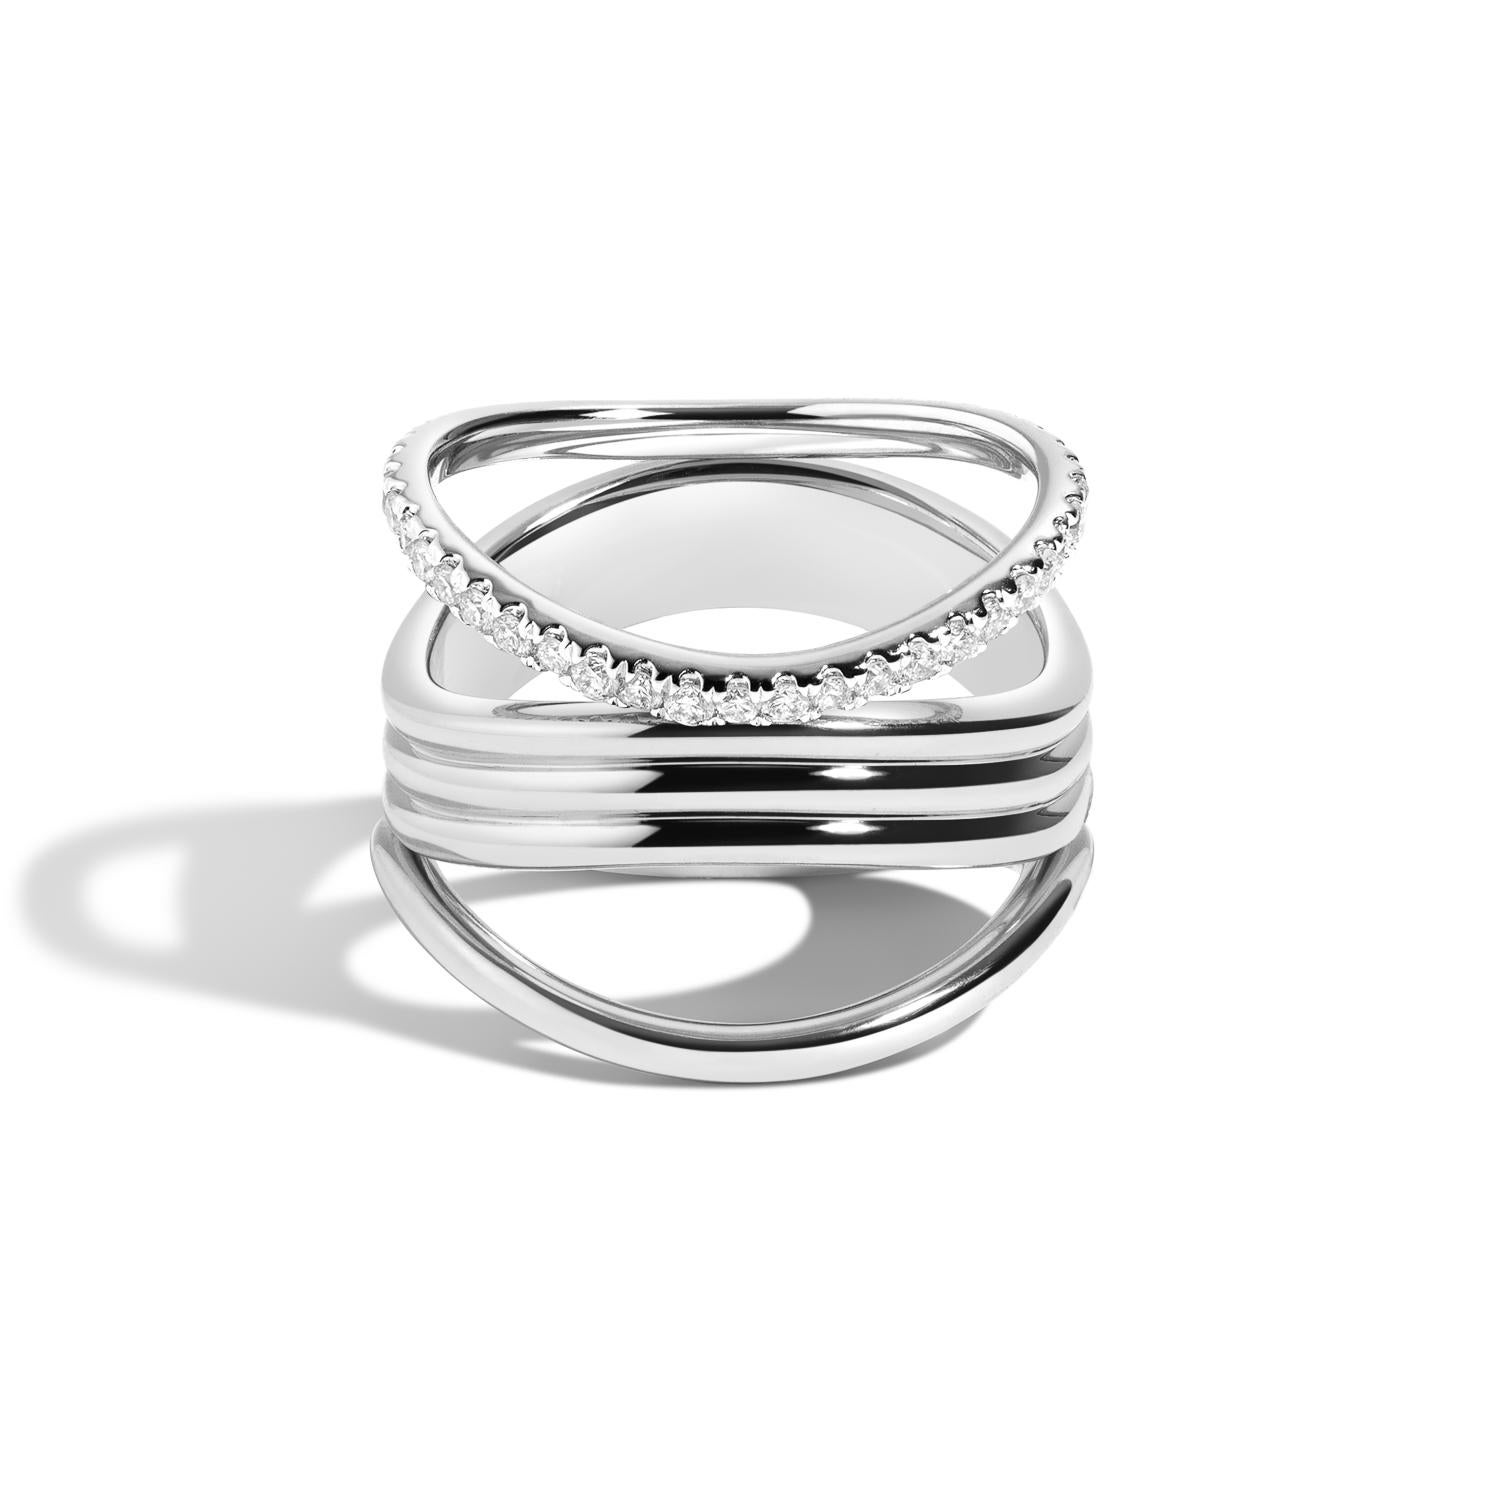 Consisting of an elegant undulating wave of three thin bands, our Bossa Nova Trio Ring looks lovely on its own or stacked with other rings from our Bossa Nova series (available as a set with the diamond version here). Also works great as a masculine